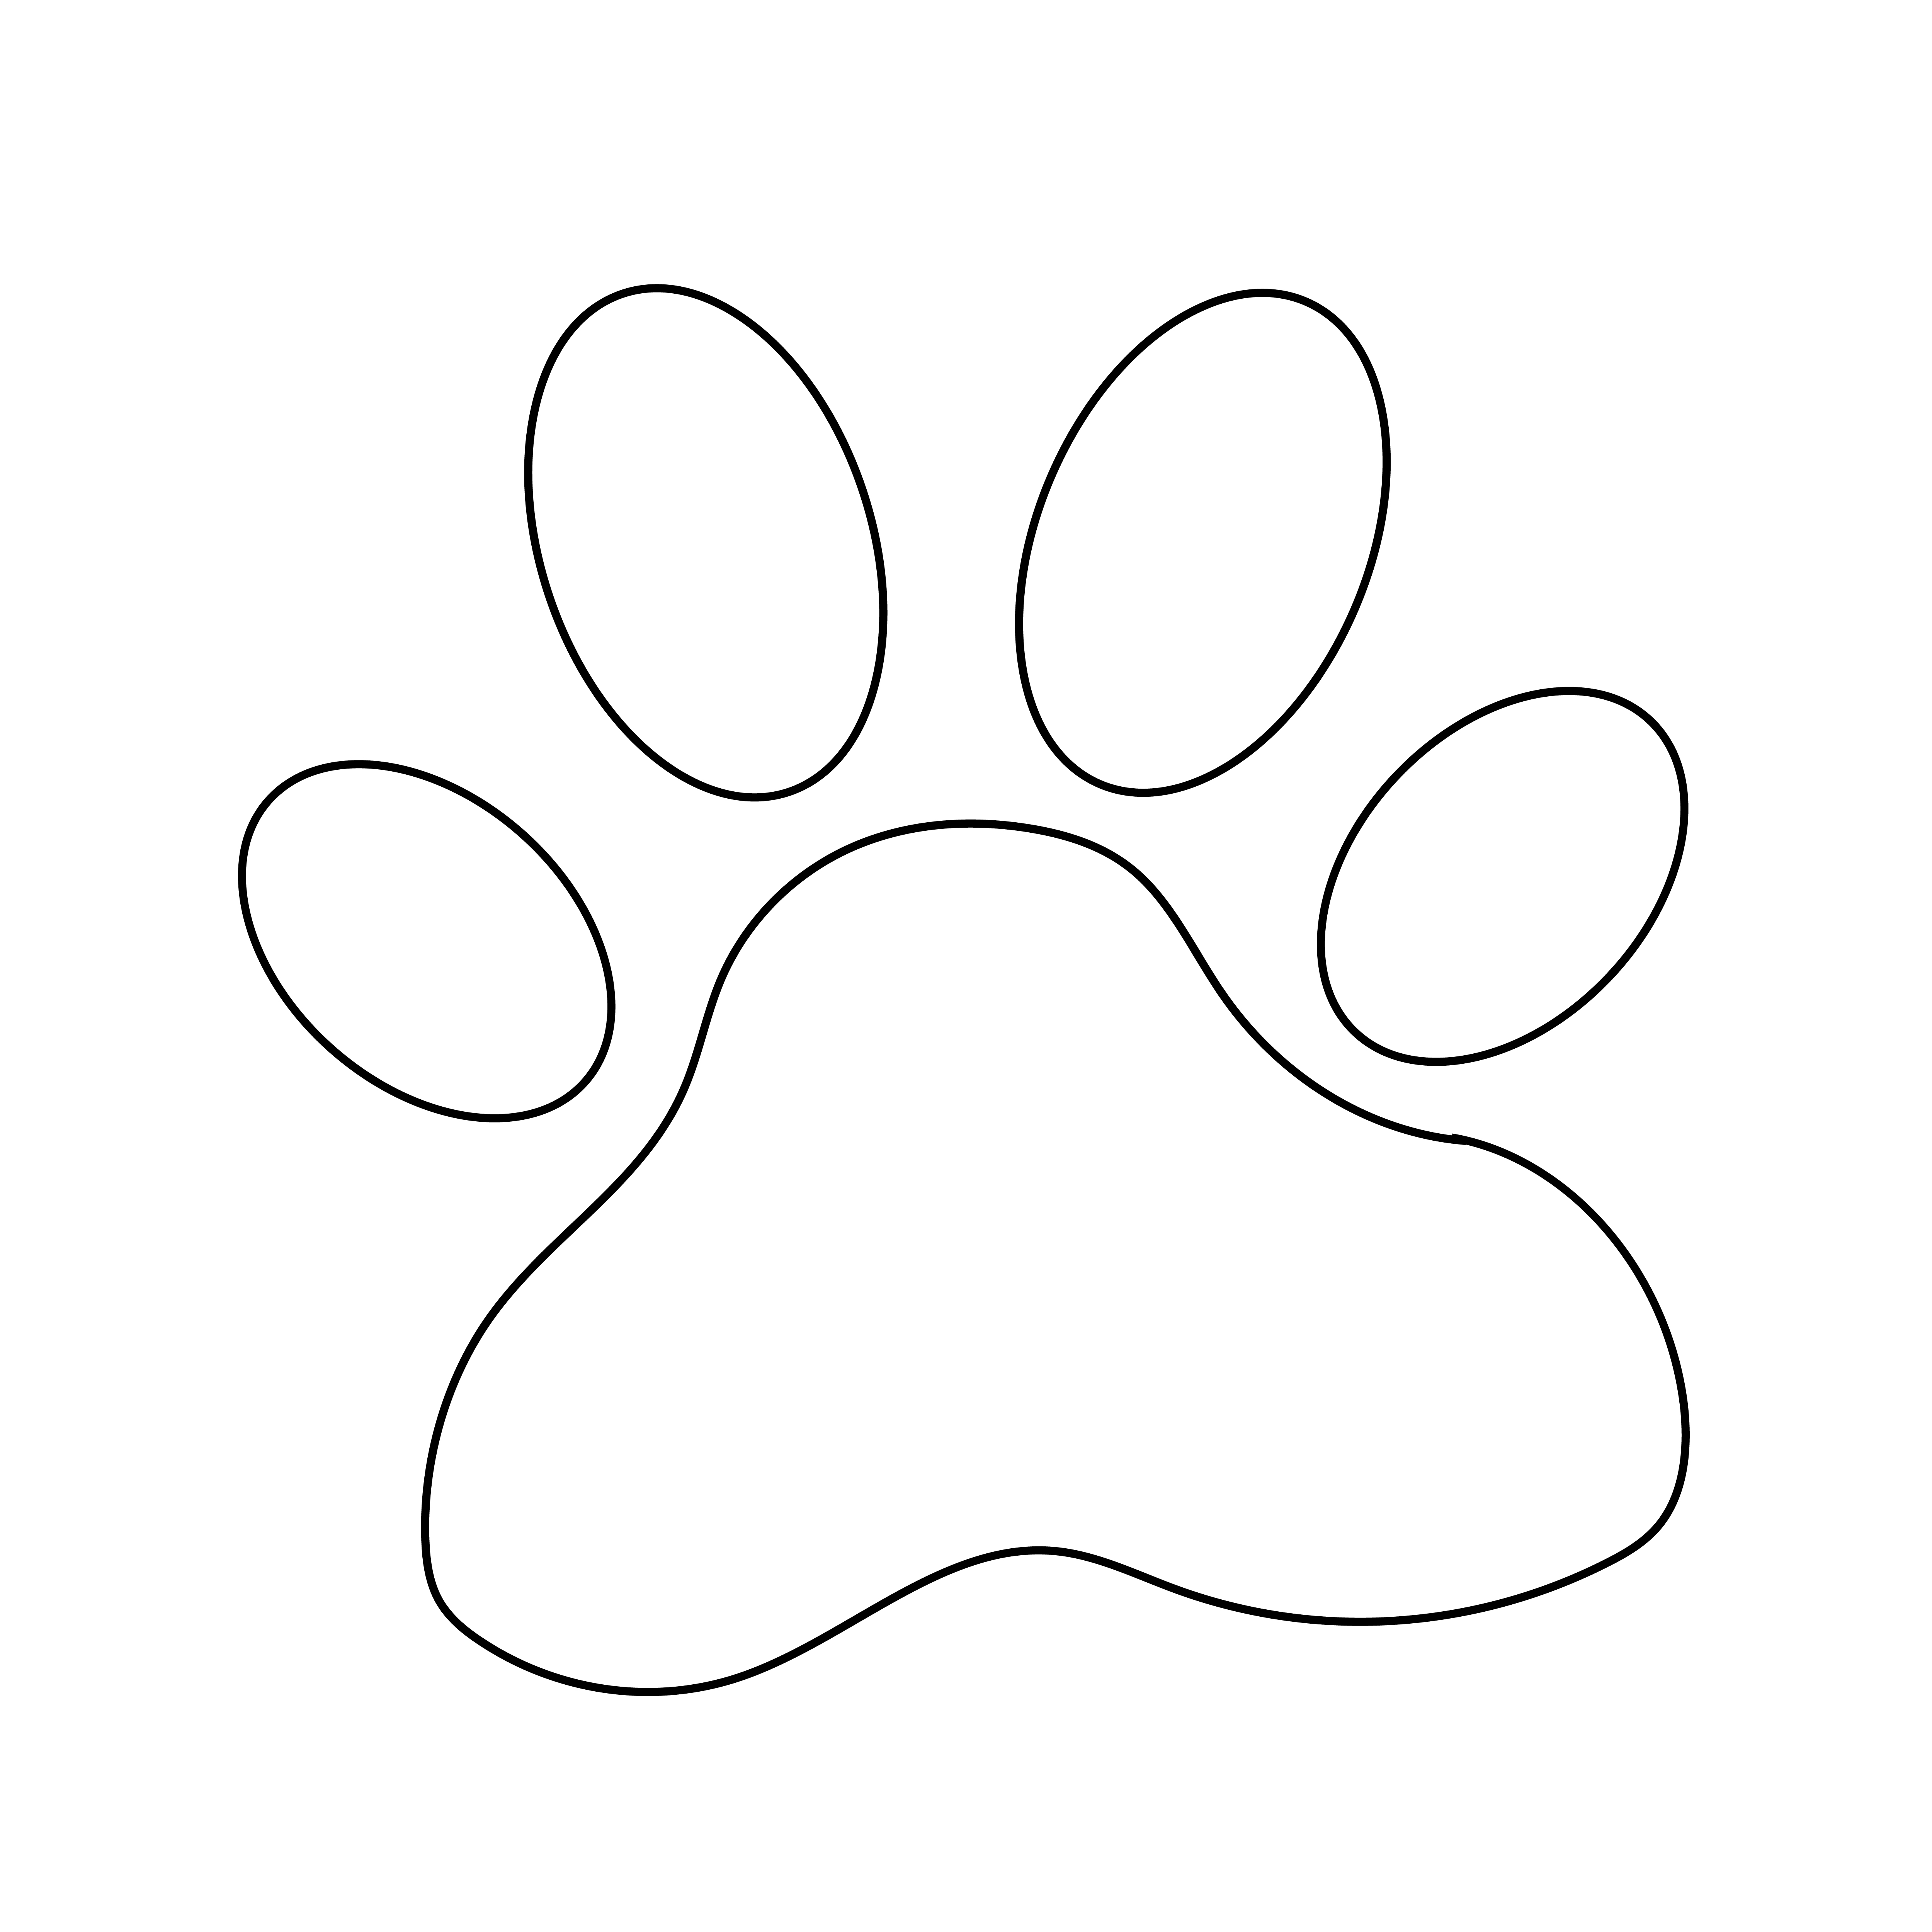 Download animal paw print icon 569680 - Download Free Vectors, Clipart Graphics & Vector Art